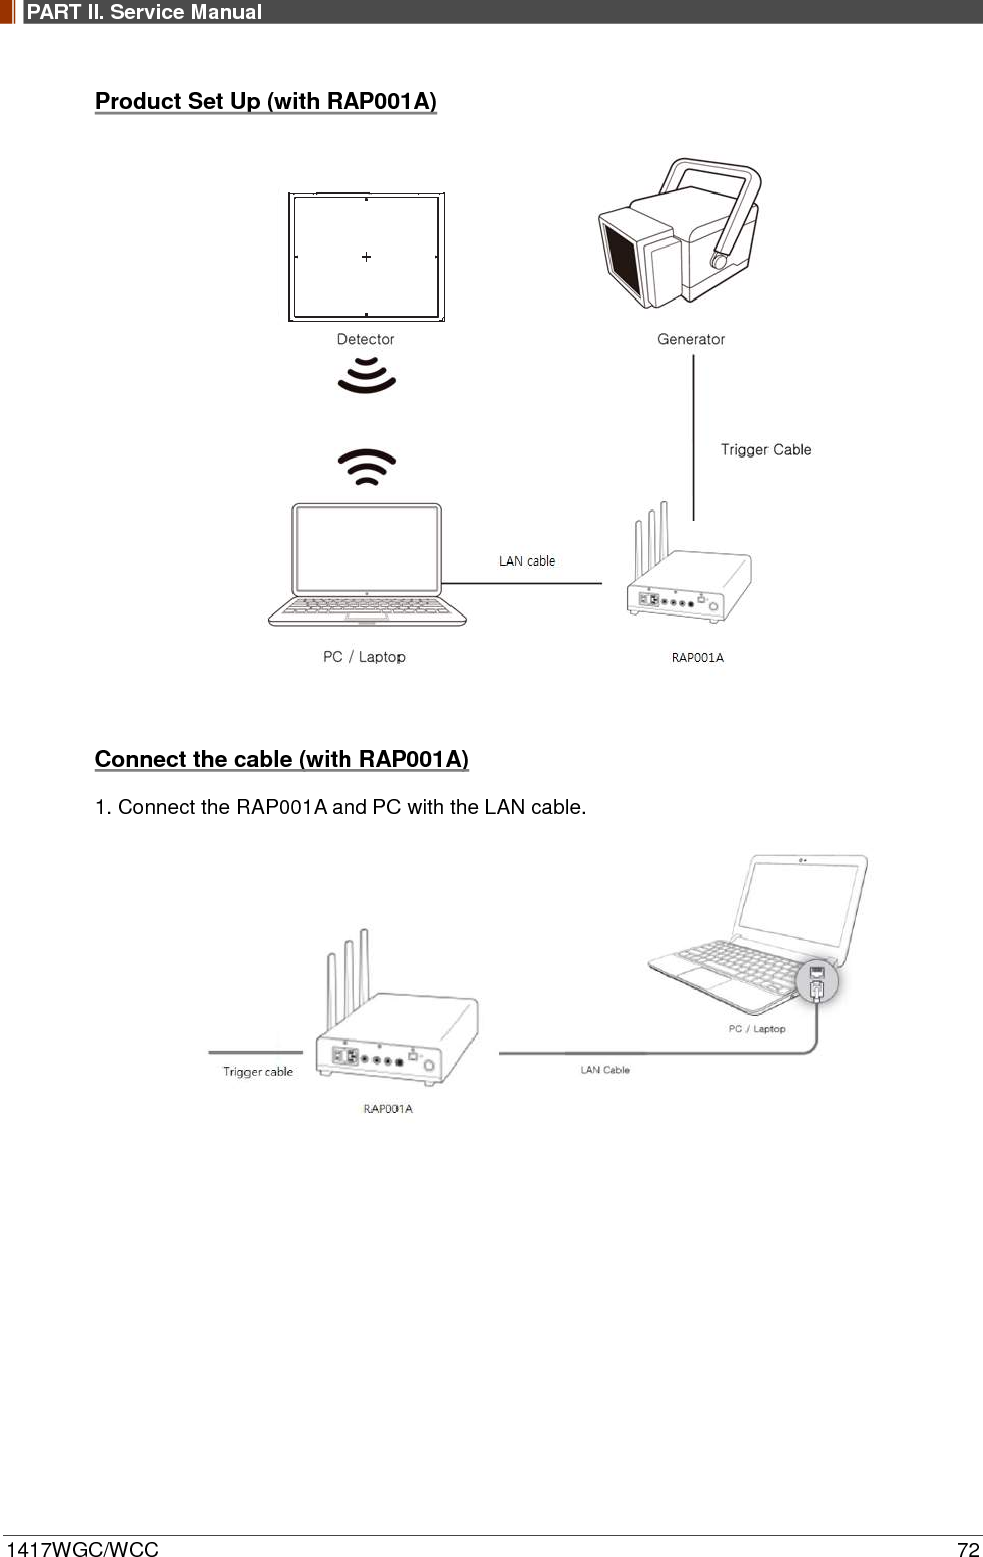 PART II. Service Manual  1417WGC/WCC 72 Product Set Up (with RAP001A)   Connect the cable (with RAP001A) 1. Connect the RAP001A and PC with the LAN cable.      